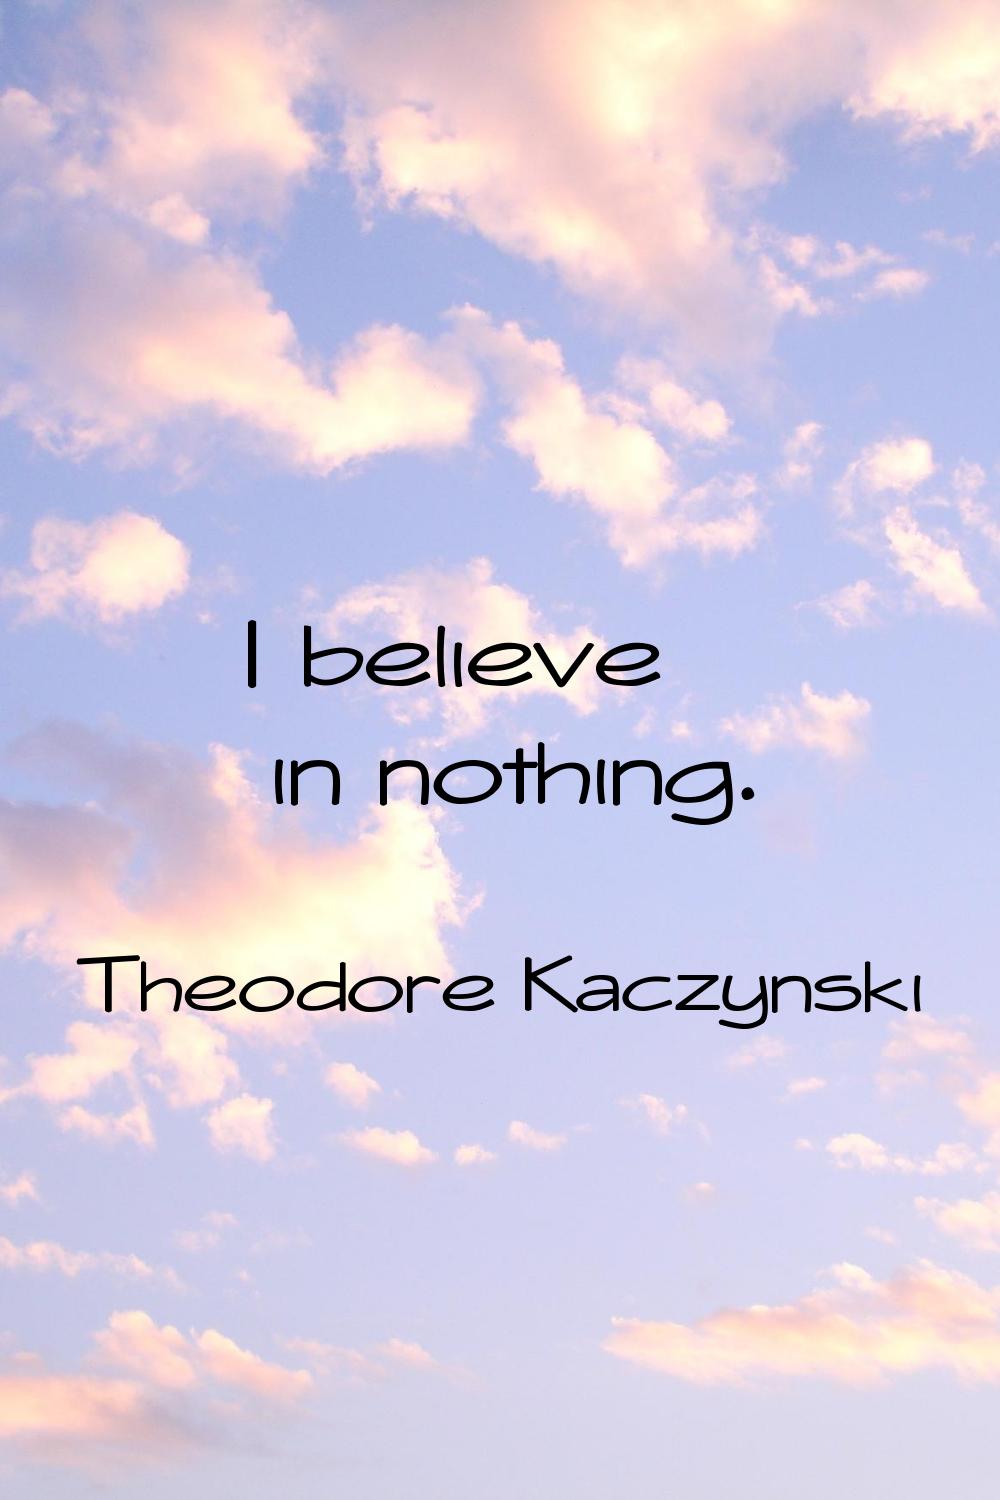 I believe in nothing.